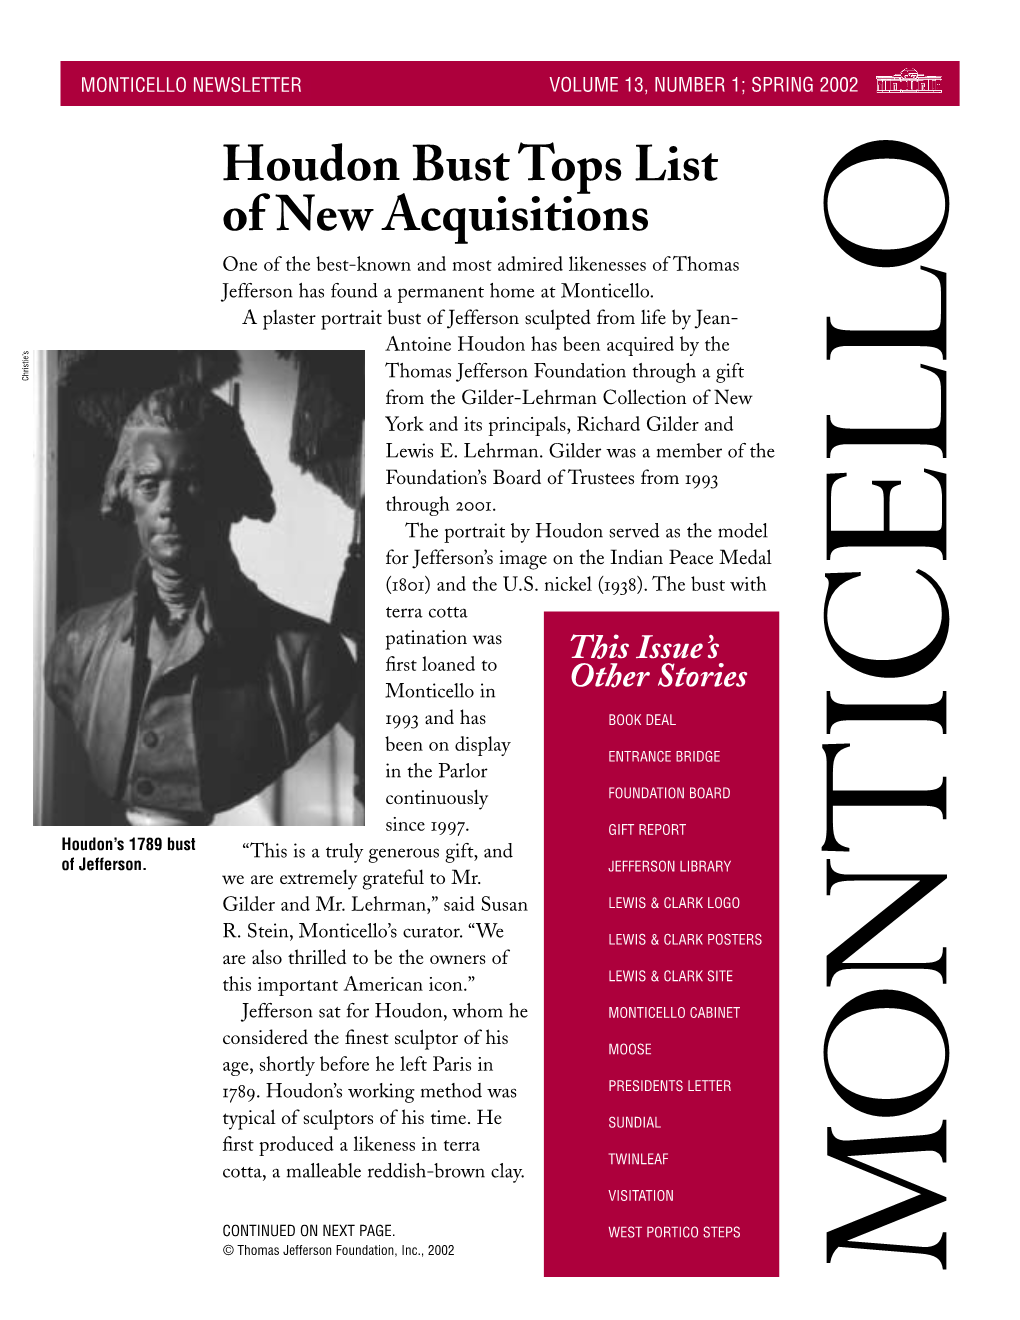 Houdon Bust Lists the Top of New Acquisitions